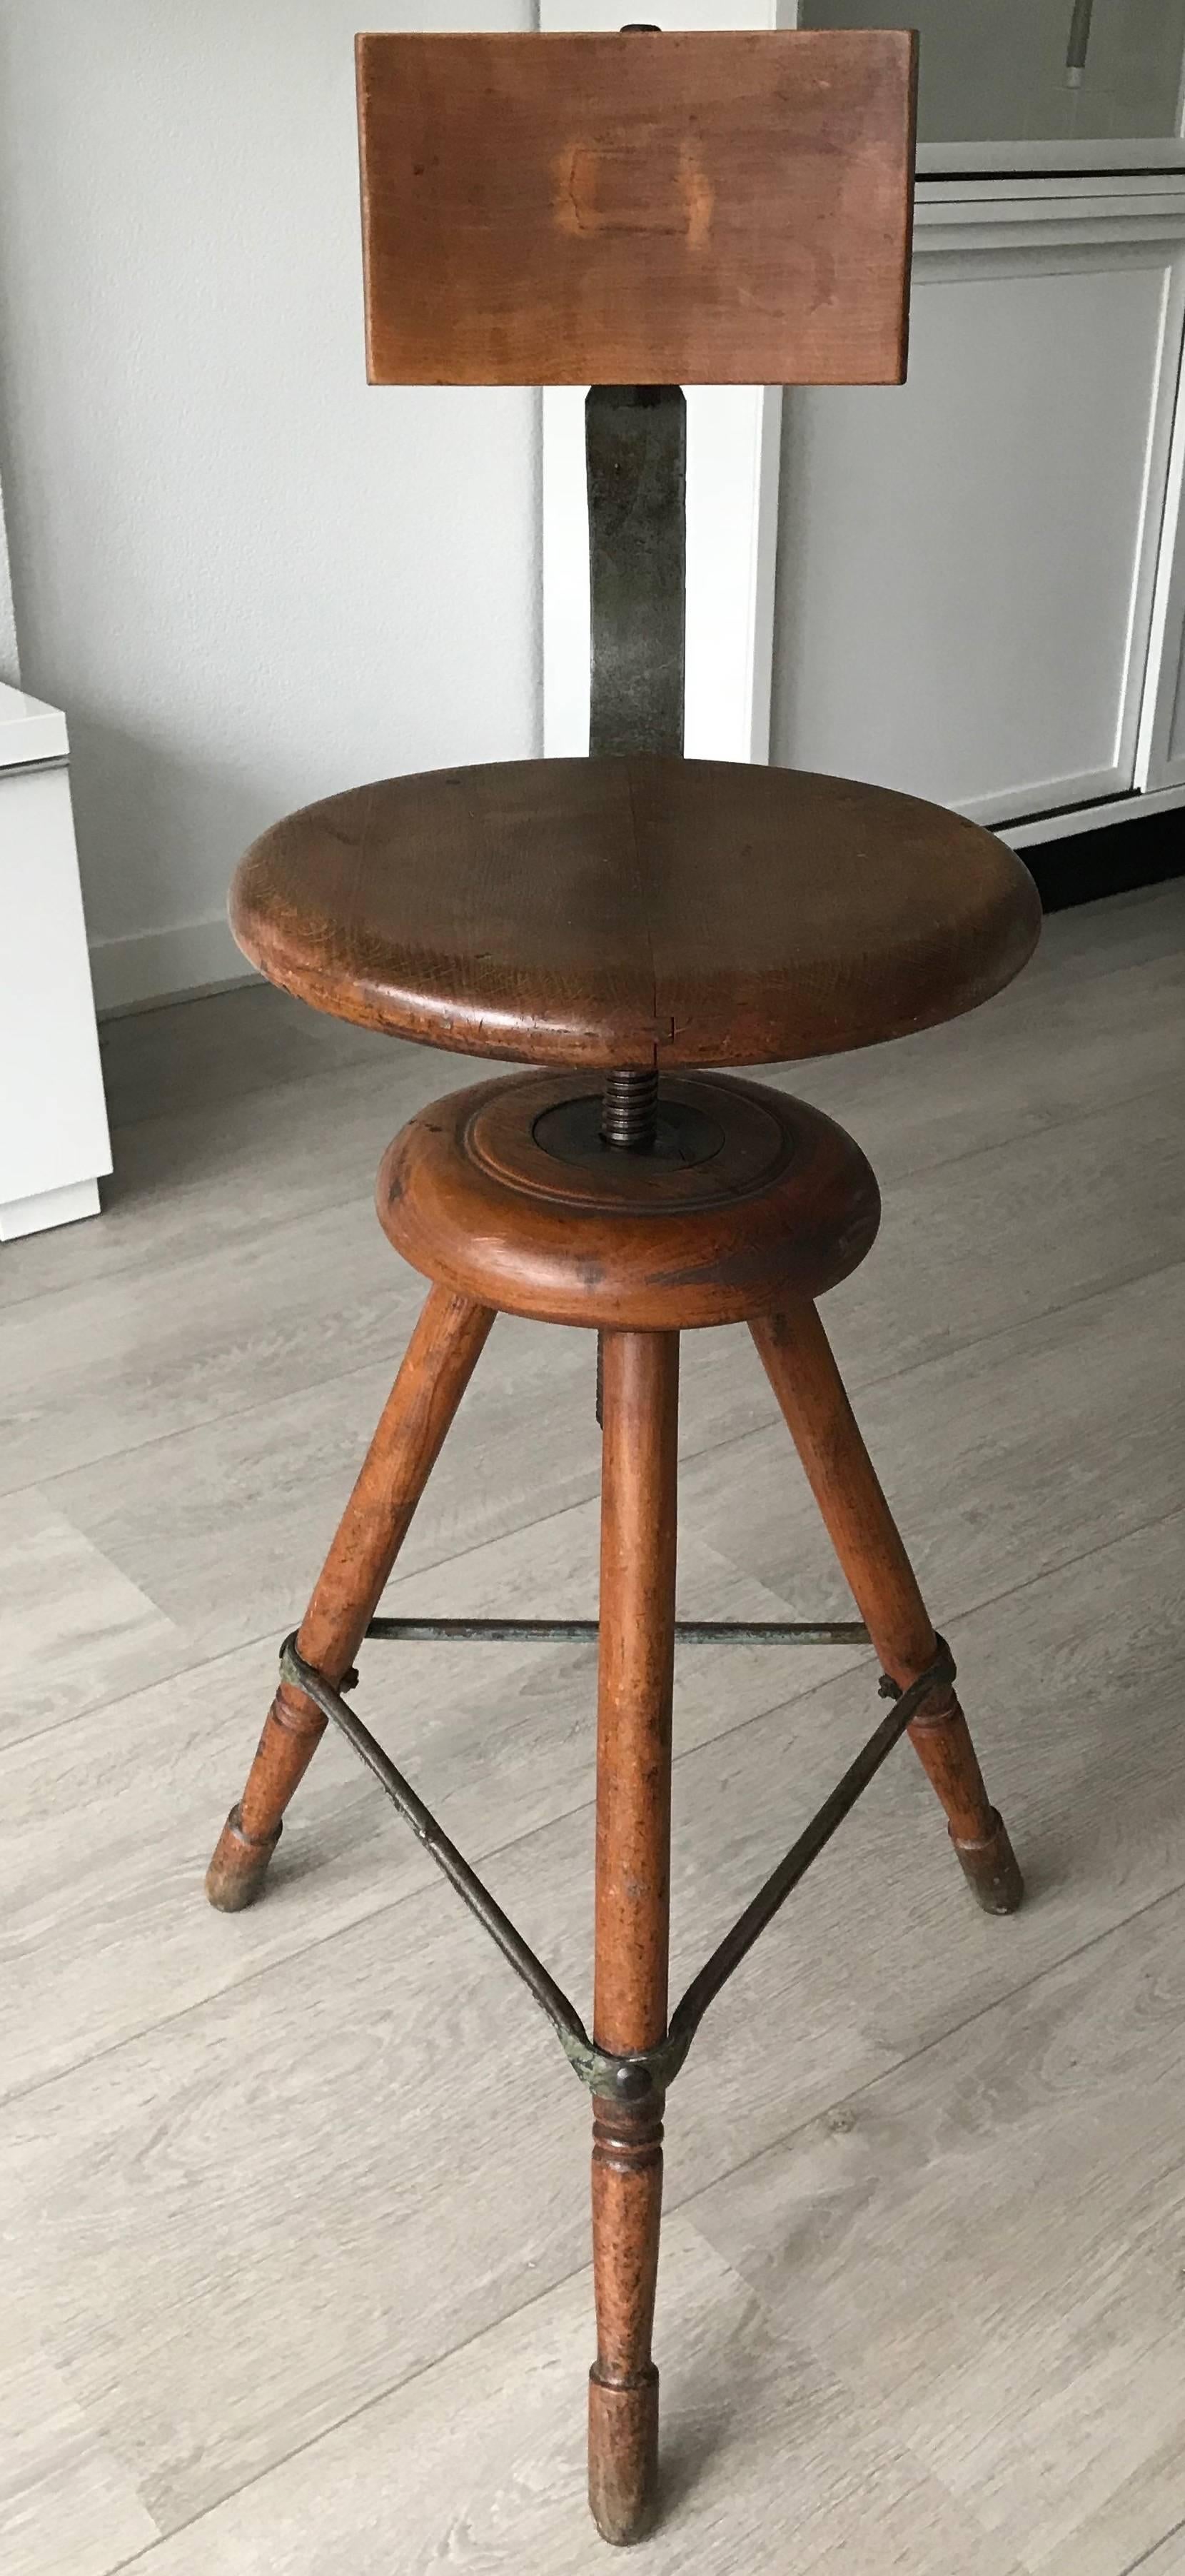 Hand-Crafted Rare Industrial Artist Studio Spindle Chair or Stool Adjustable in Height, 1920s